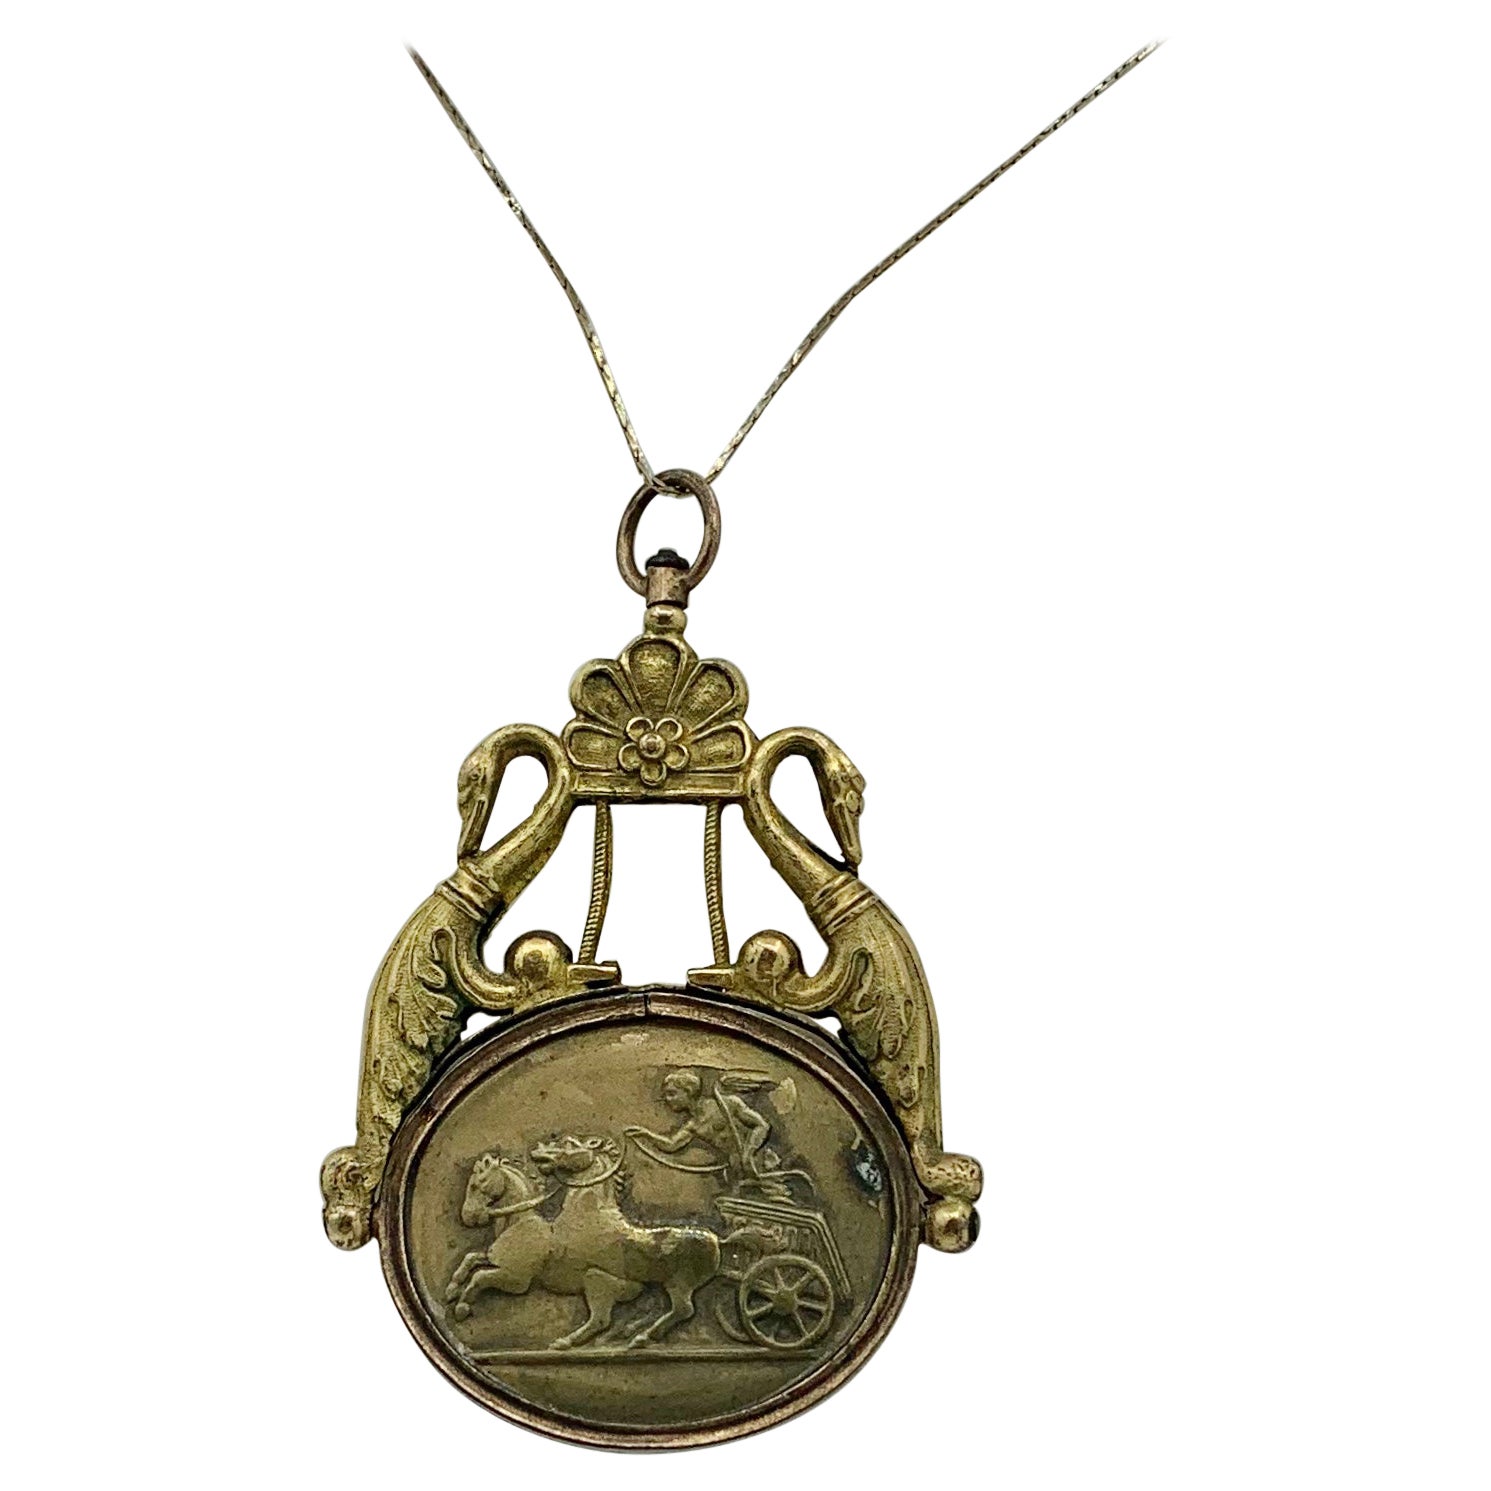 Cherub Angel Riding Chariot Swan Bird Pendant Necklace Neoclassical Antique For Sale